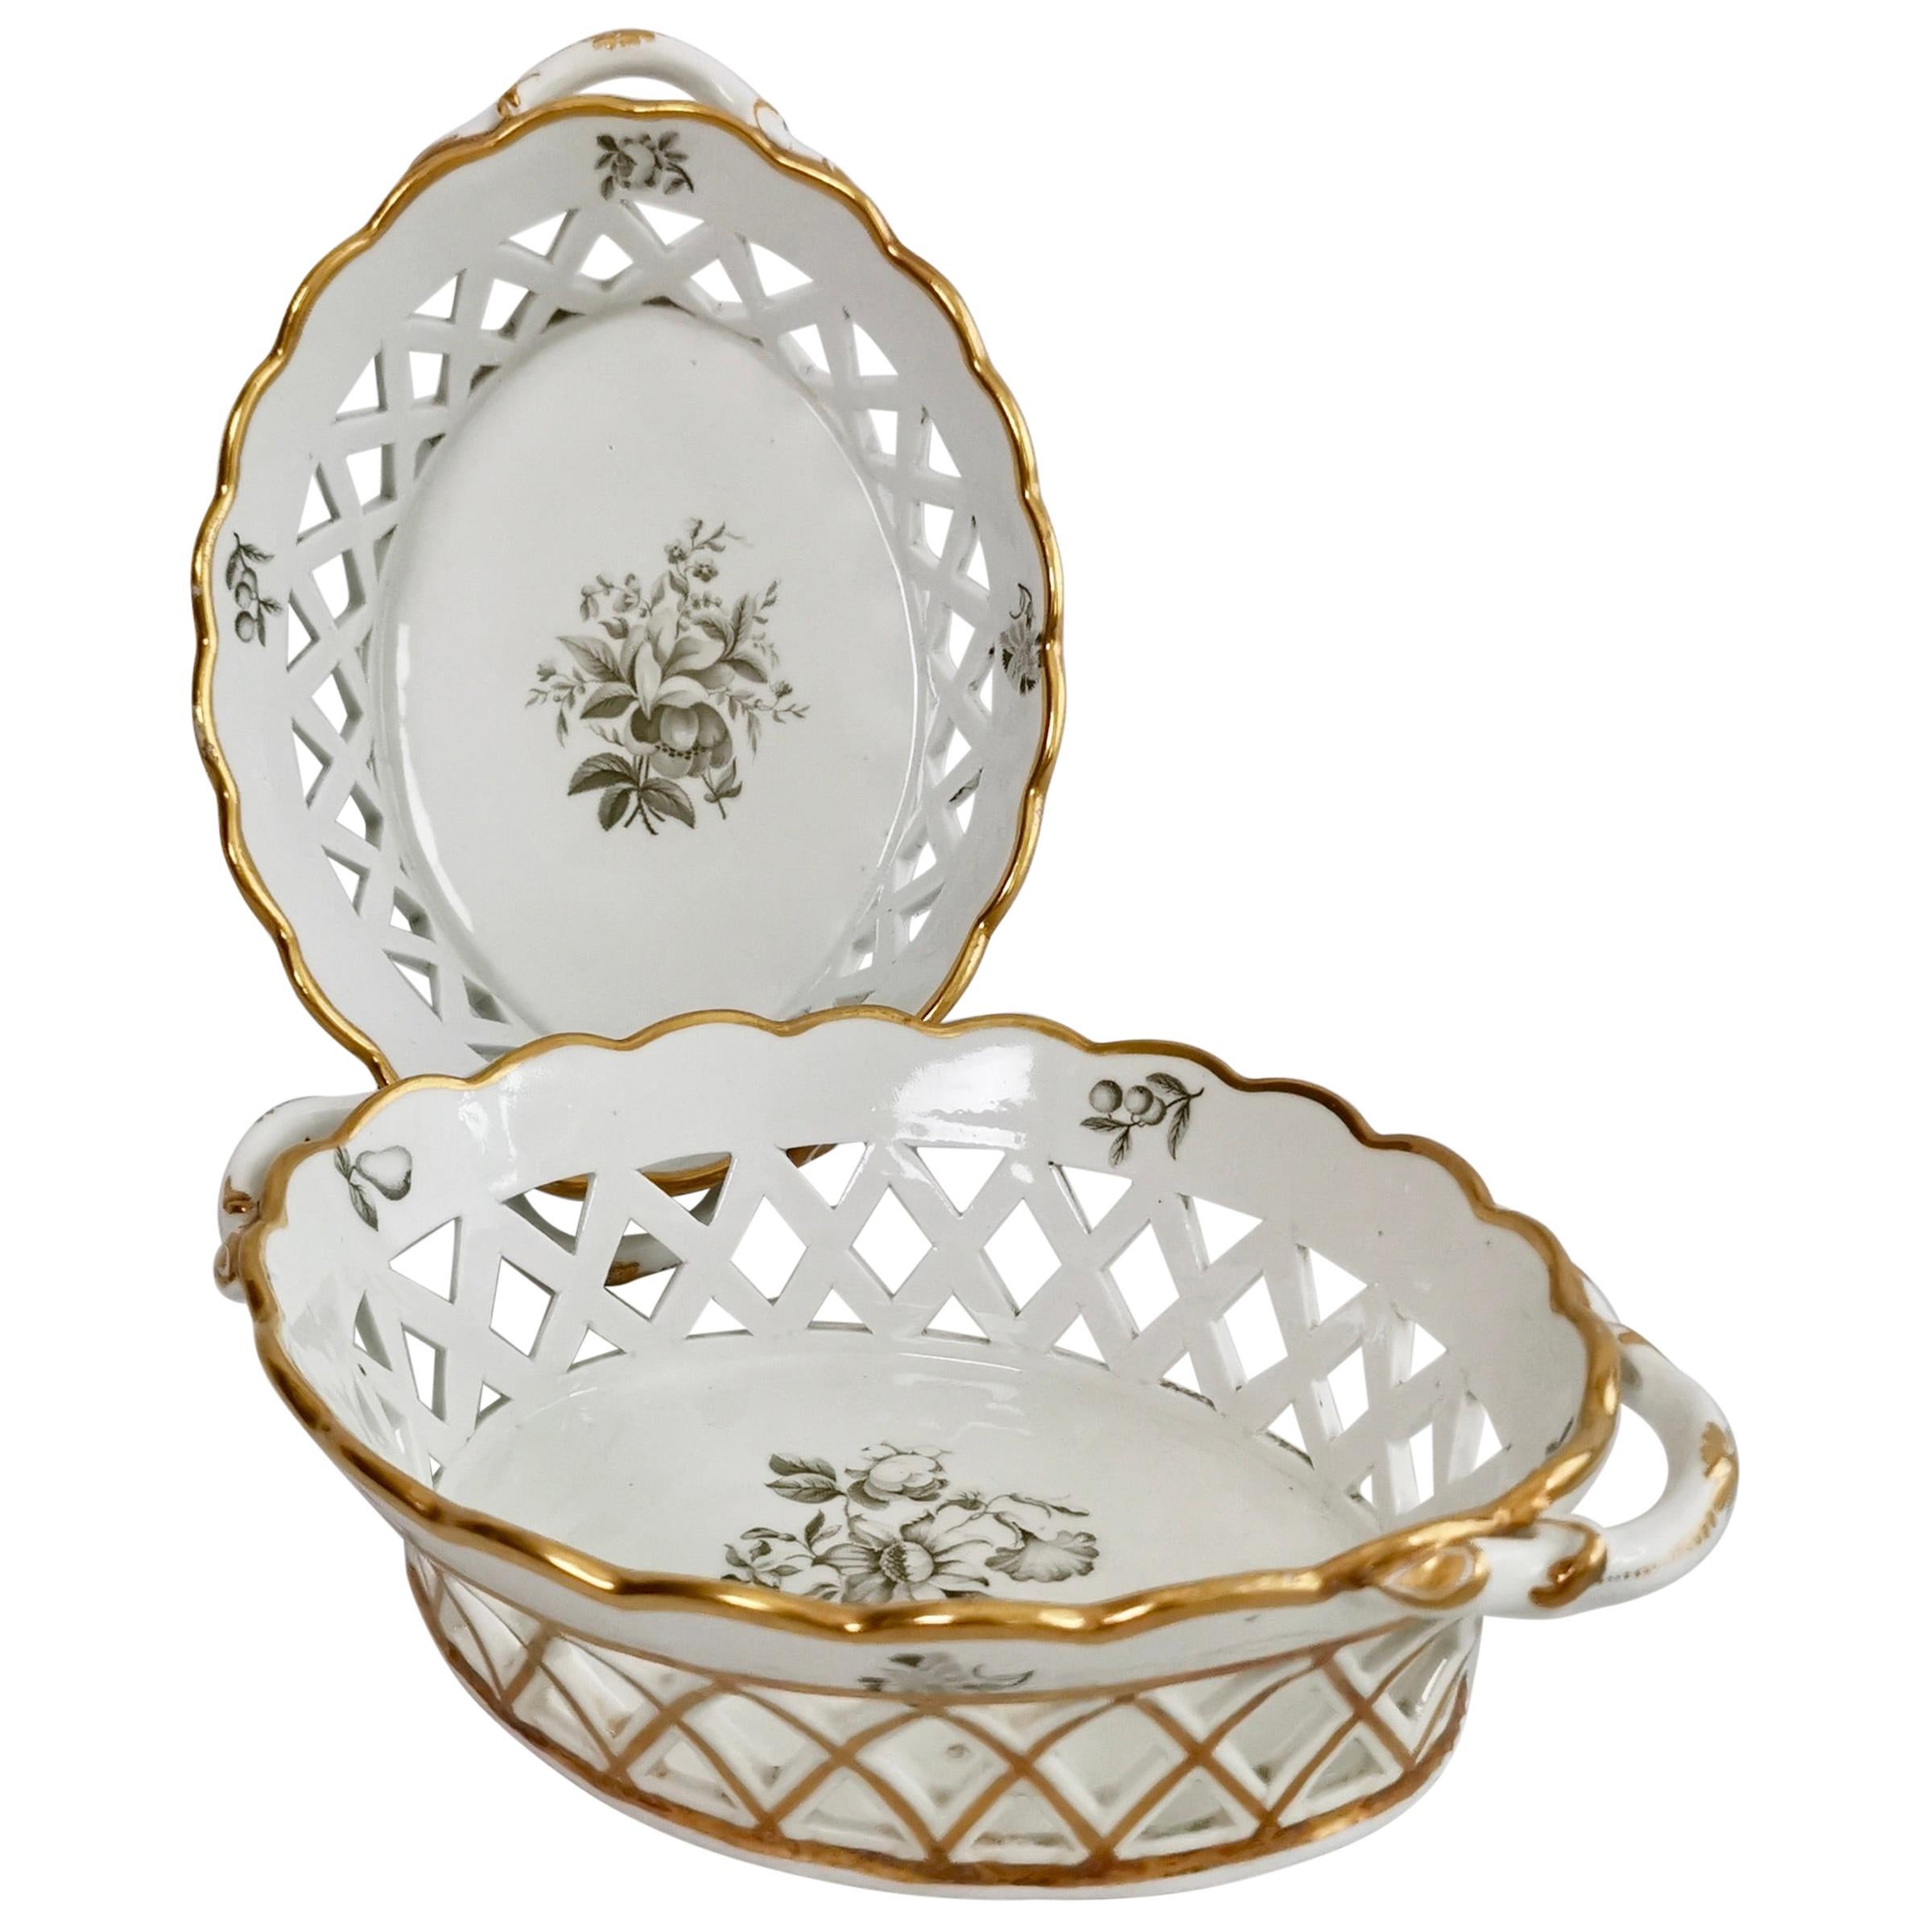 Spode Pair of Porcelain Bread Baskets, White with Bat Printed Flowers, ca 1810